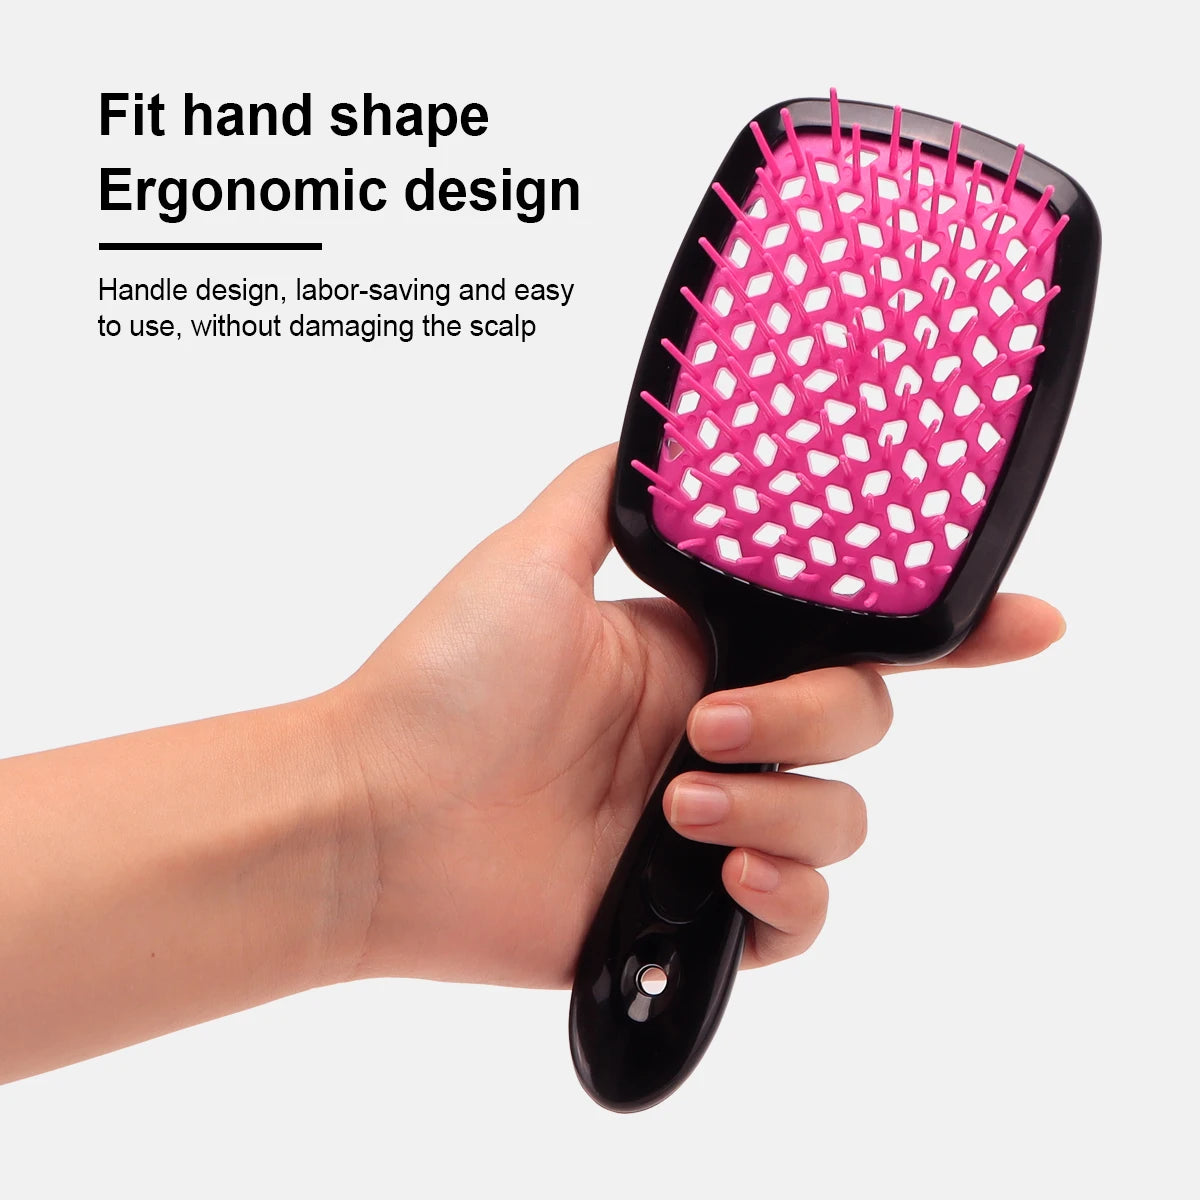 Versatile Salon-Quality Detangling Hair Brush with Anti-static Cushion & Barber Styling Features